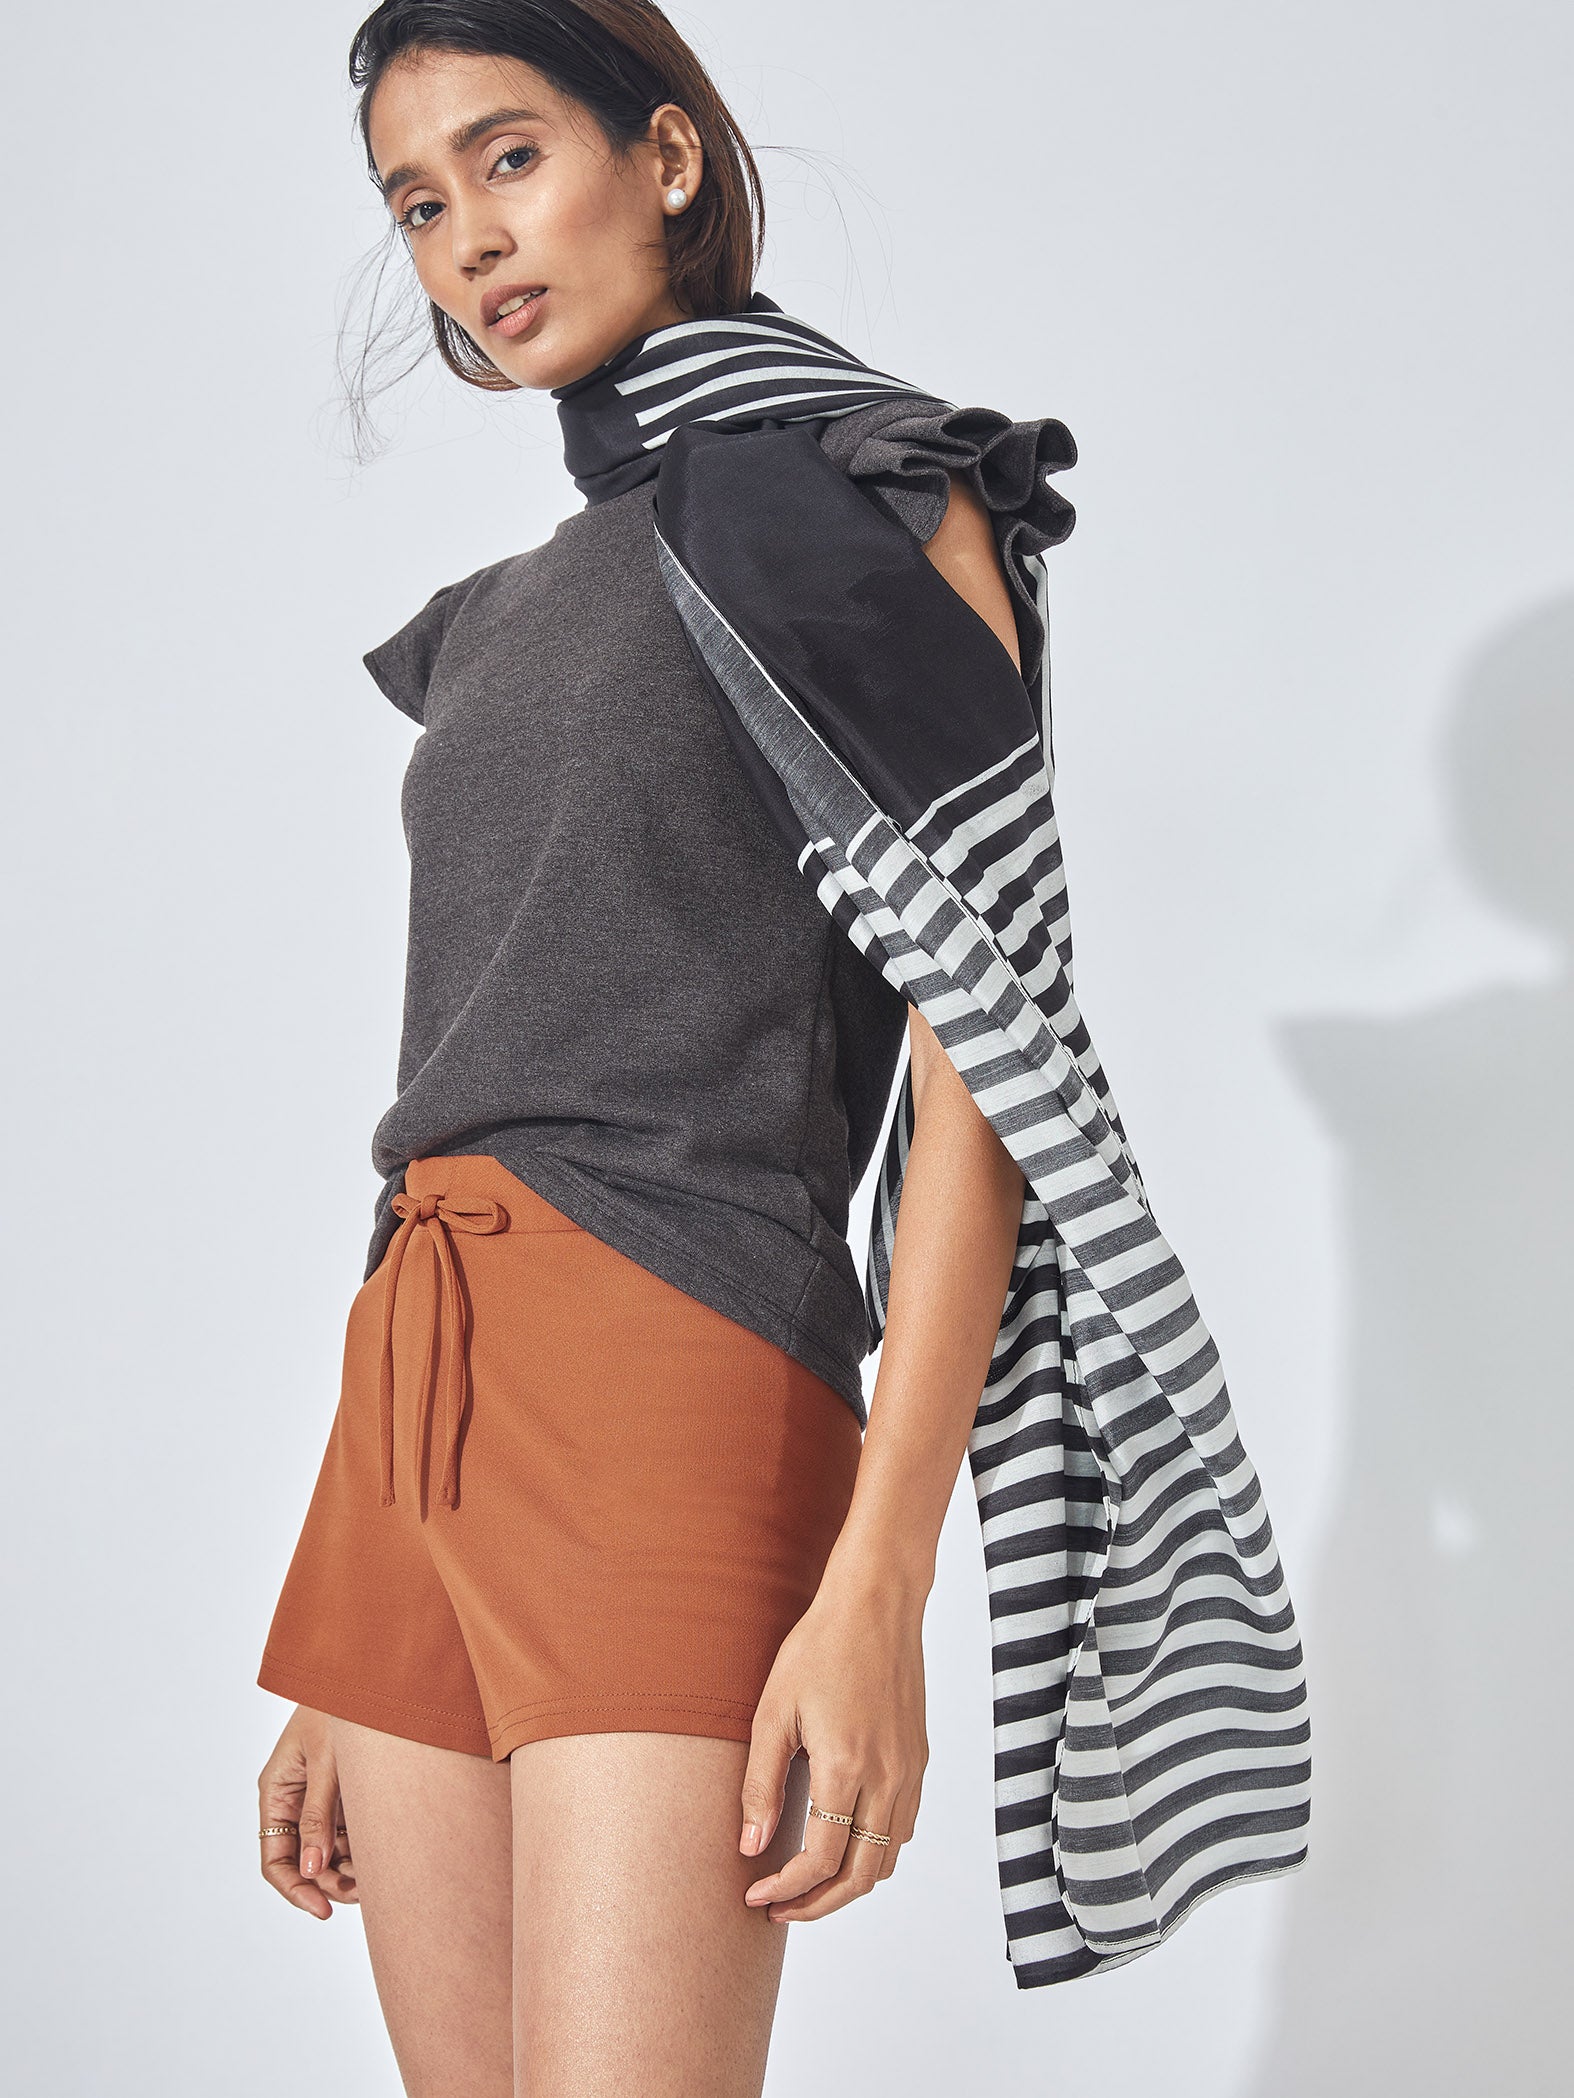 Rust Textured Knit Shorts